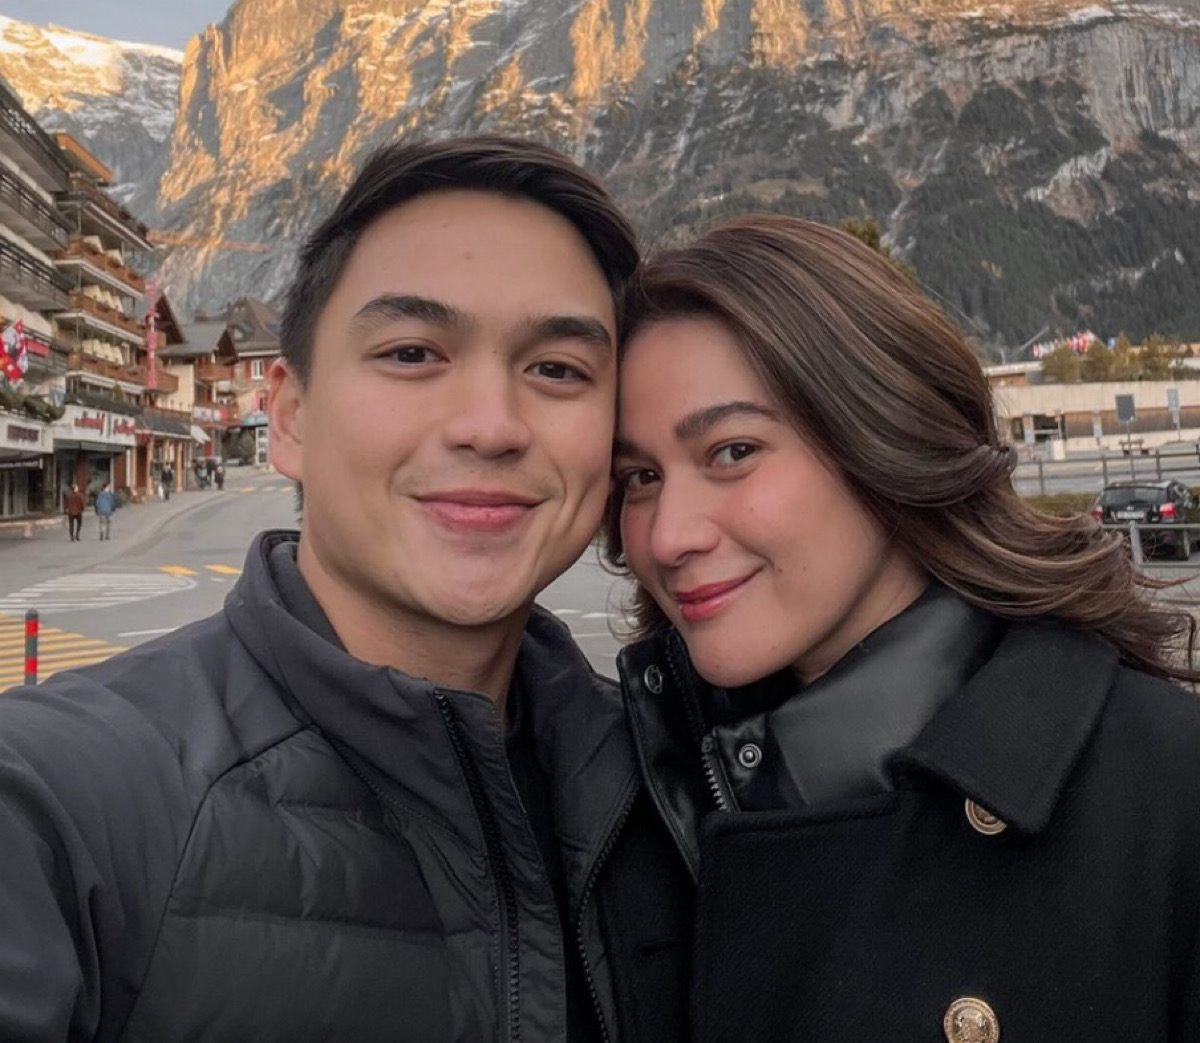 Dominic Roque’s sibling shares wolf in sheep's clothing amid reported split with Bea Alonzo